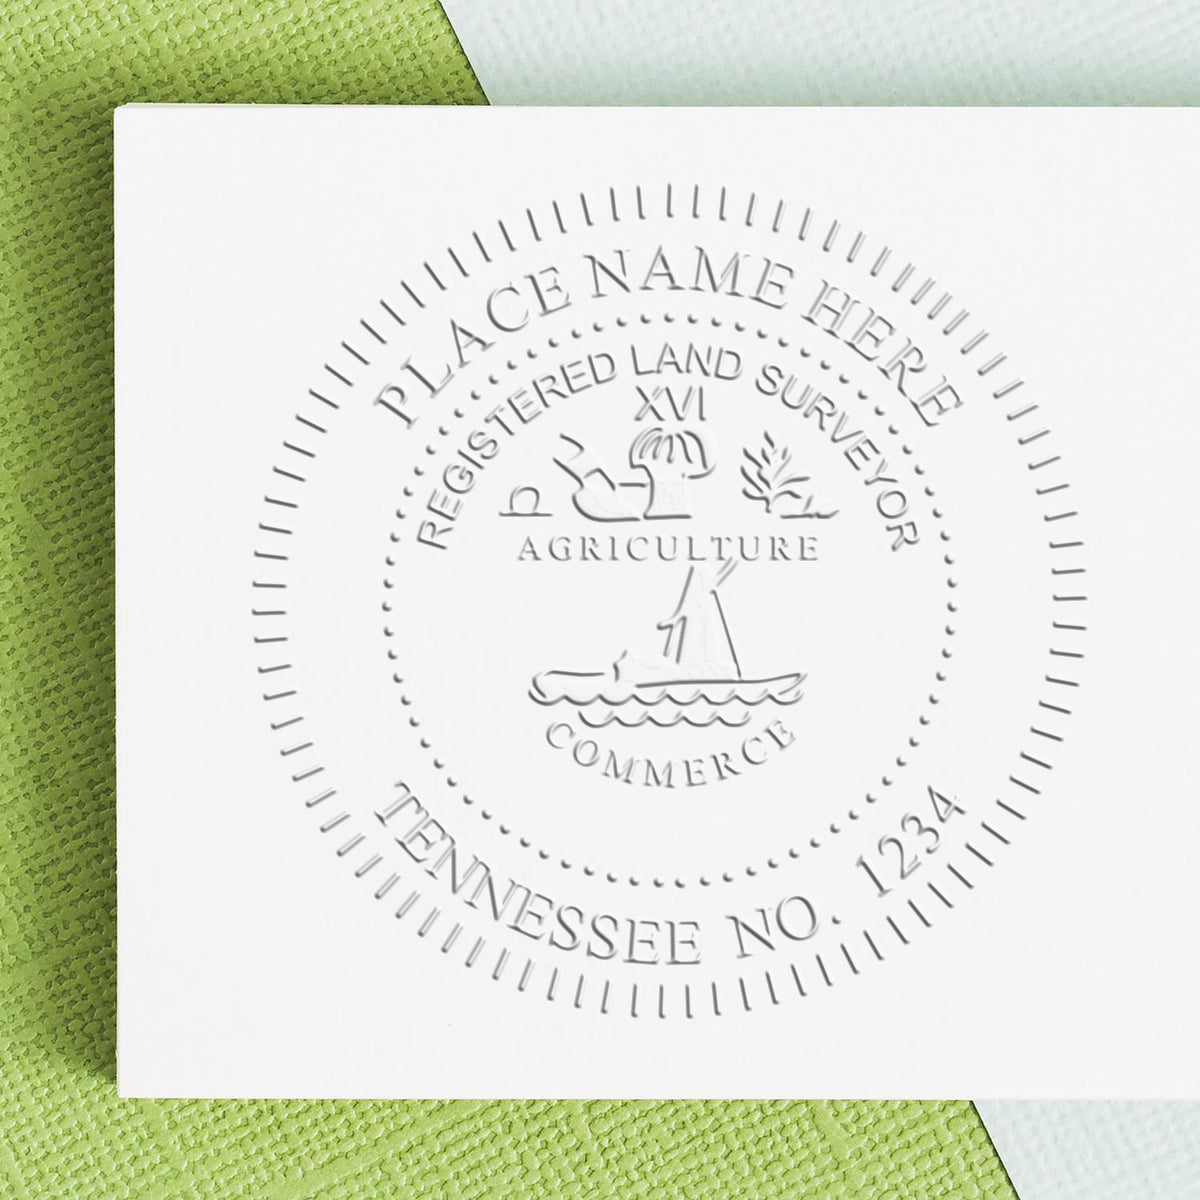 Another Example of a stamped impression of the State of Tennessee Soft Land Surveyor Embossing Seal on a piece of office paper.